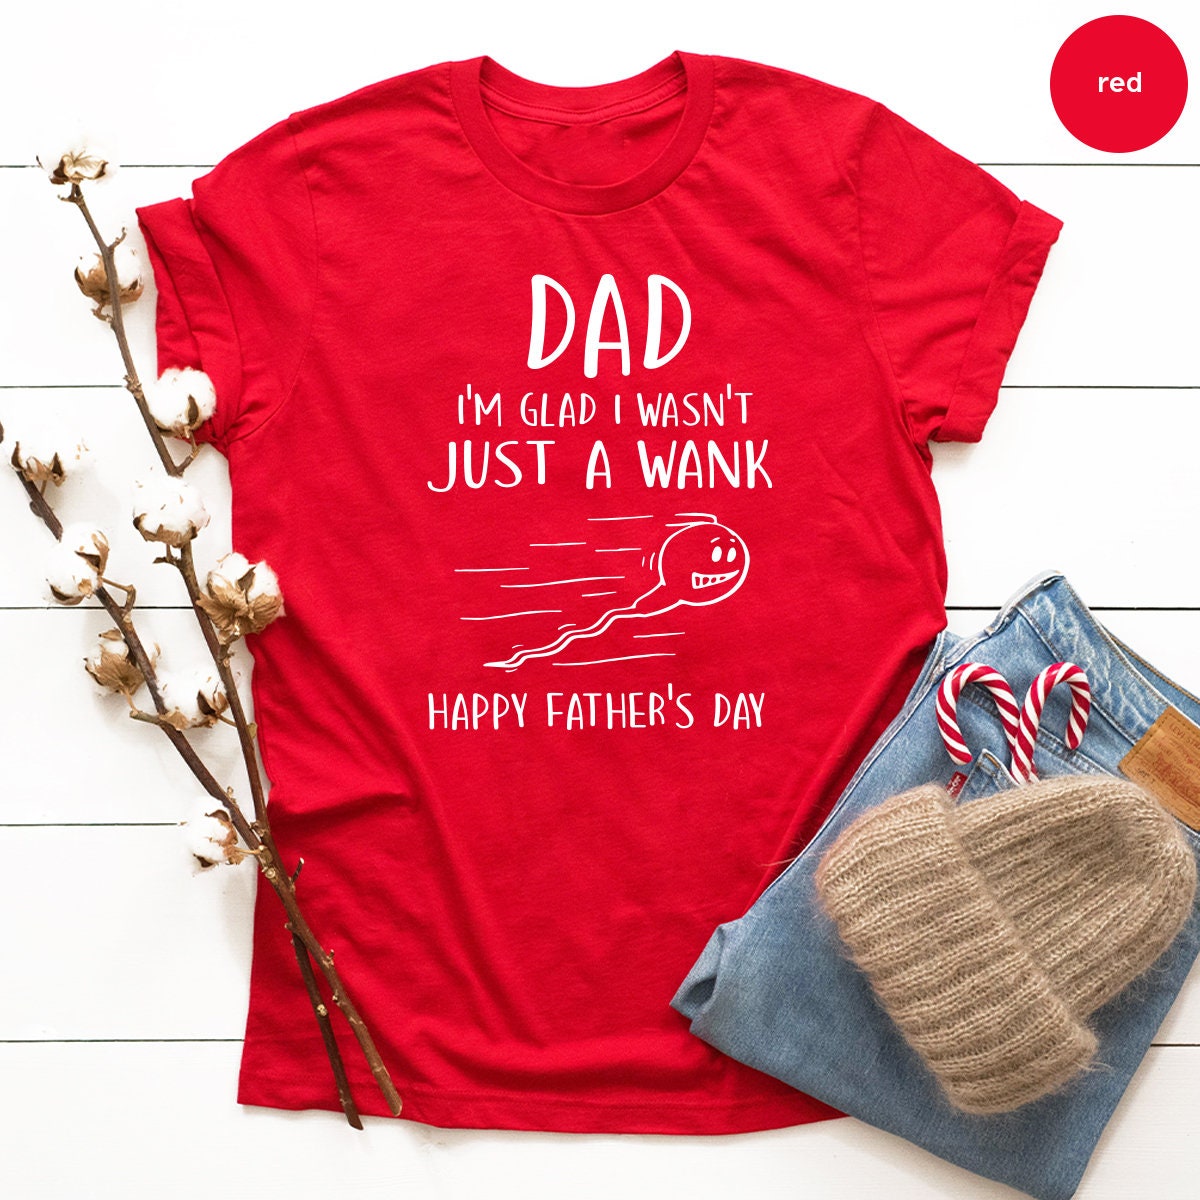 Funny Fathers Day Shirt, Dad I'm Glad Shirt, I Wasn't Just A Wank Happy Father's Day Shirt, First Father Day Tee, New Dad Tee, Father Gift - Fastdeliverytees.com